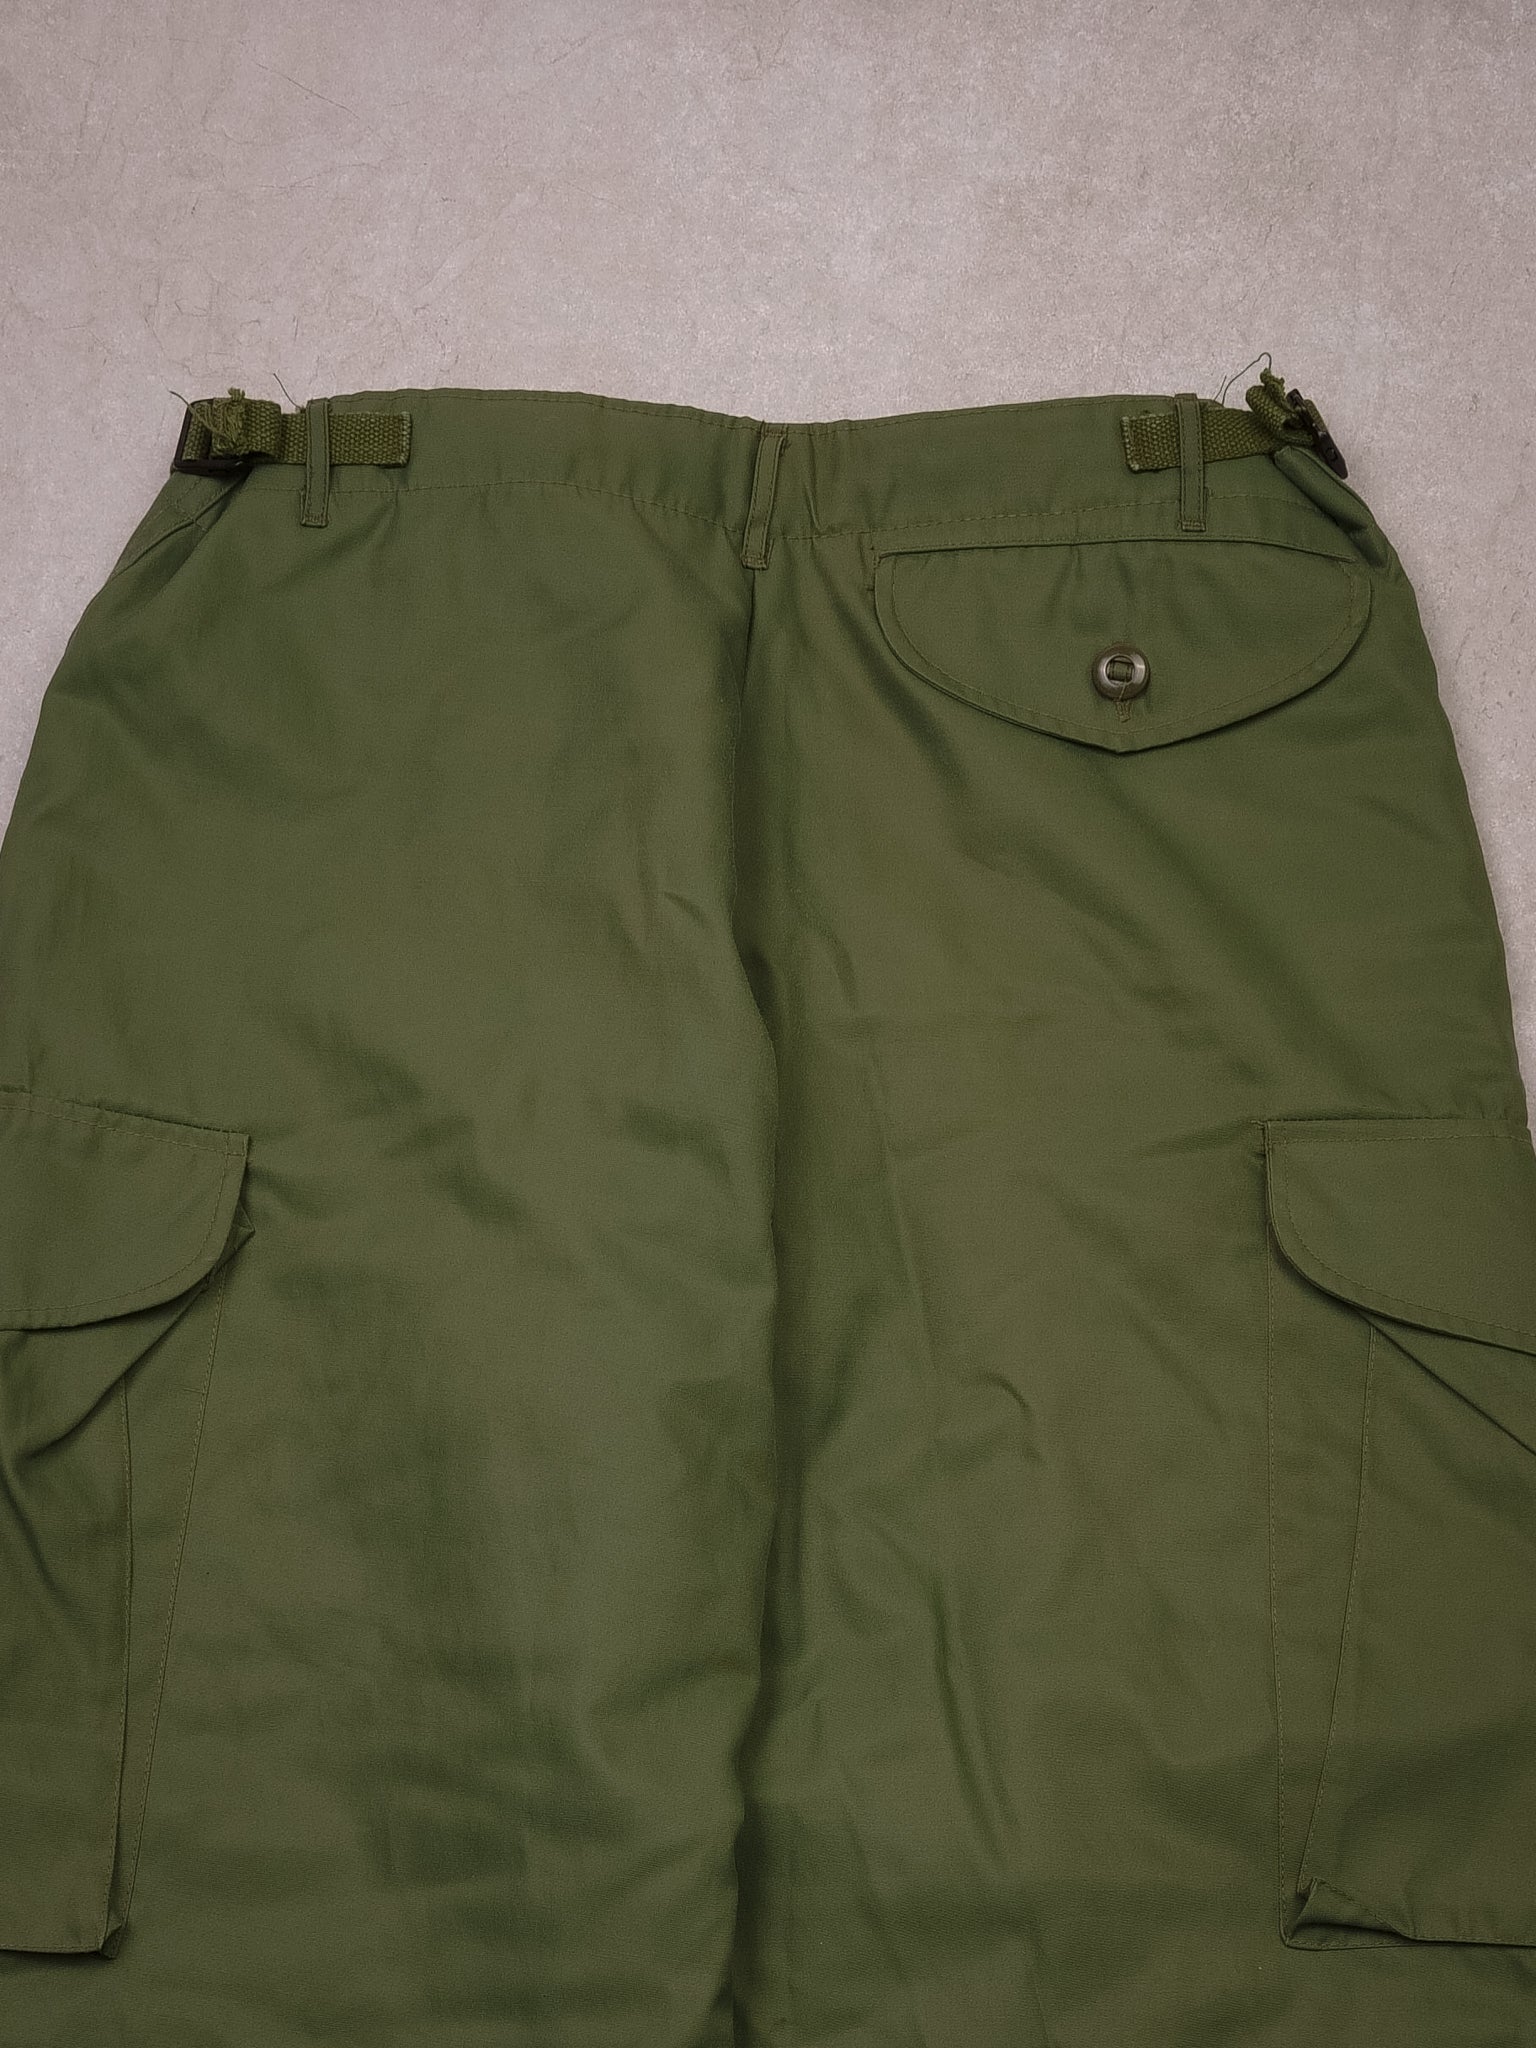 Vintage 80s Green Army Frontenac Insulated Nylon Pants (32x32)